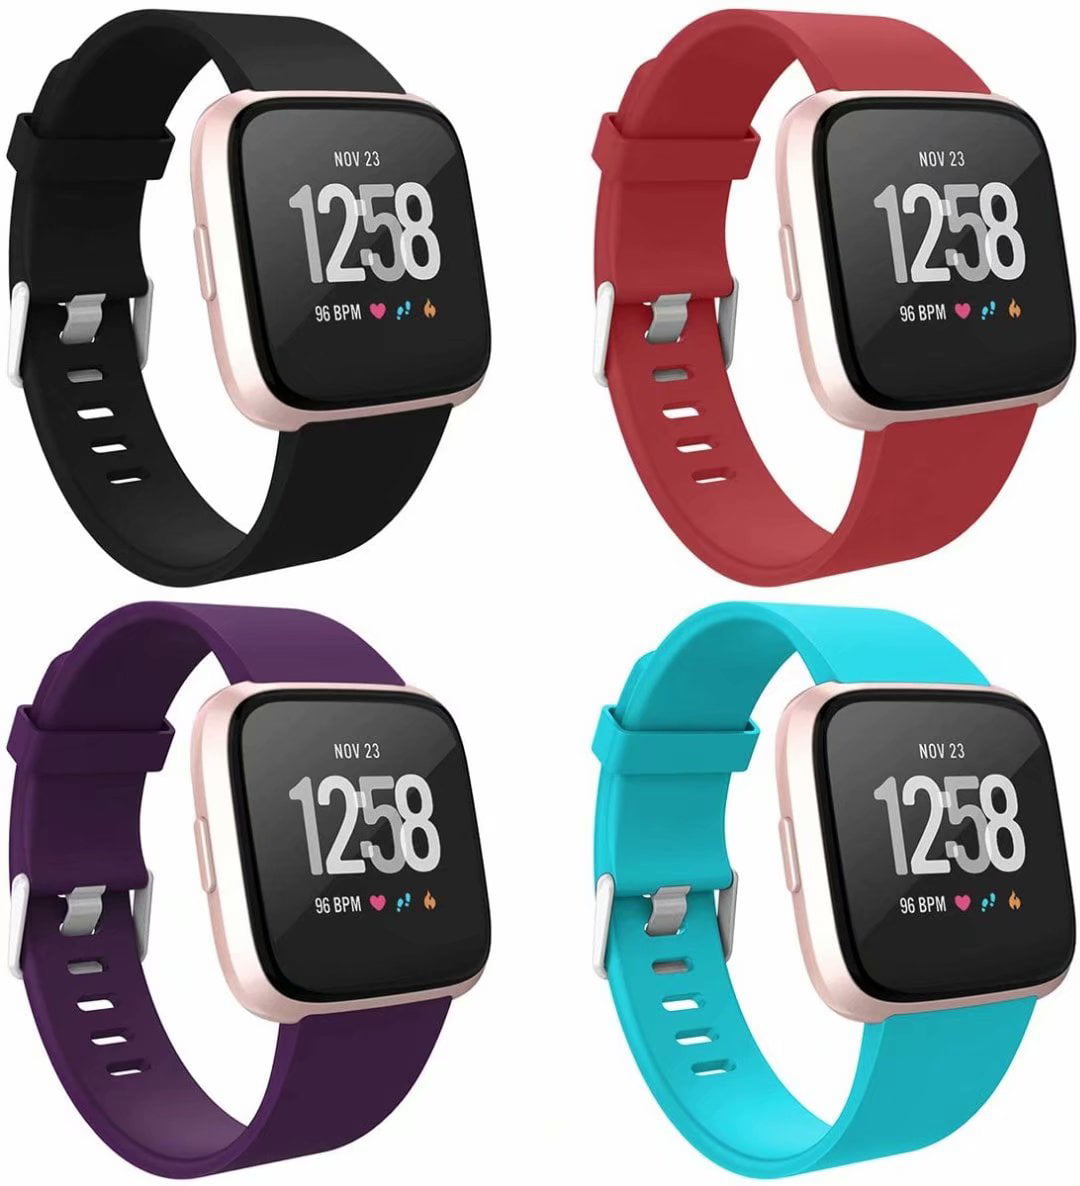 Waterproof Sport Strap Band Compatible for Fitbit Versa/Versa Lite Smartwatch Recoppa Compatible with Fitbit Versa 2 Bands for Women Men 